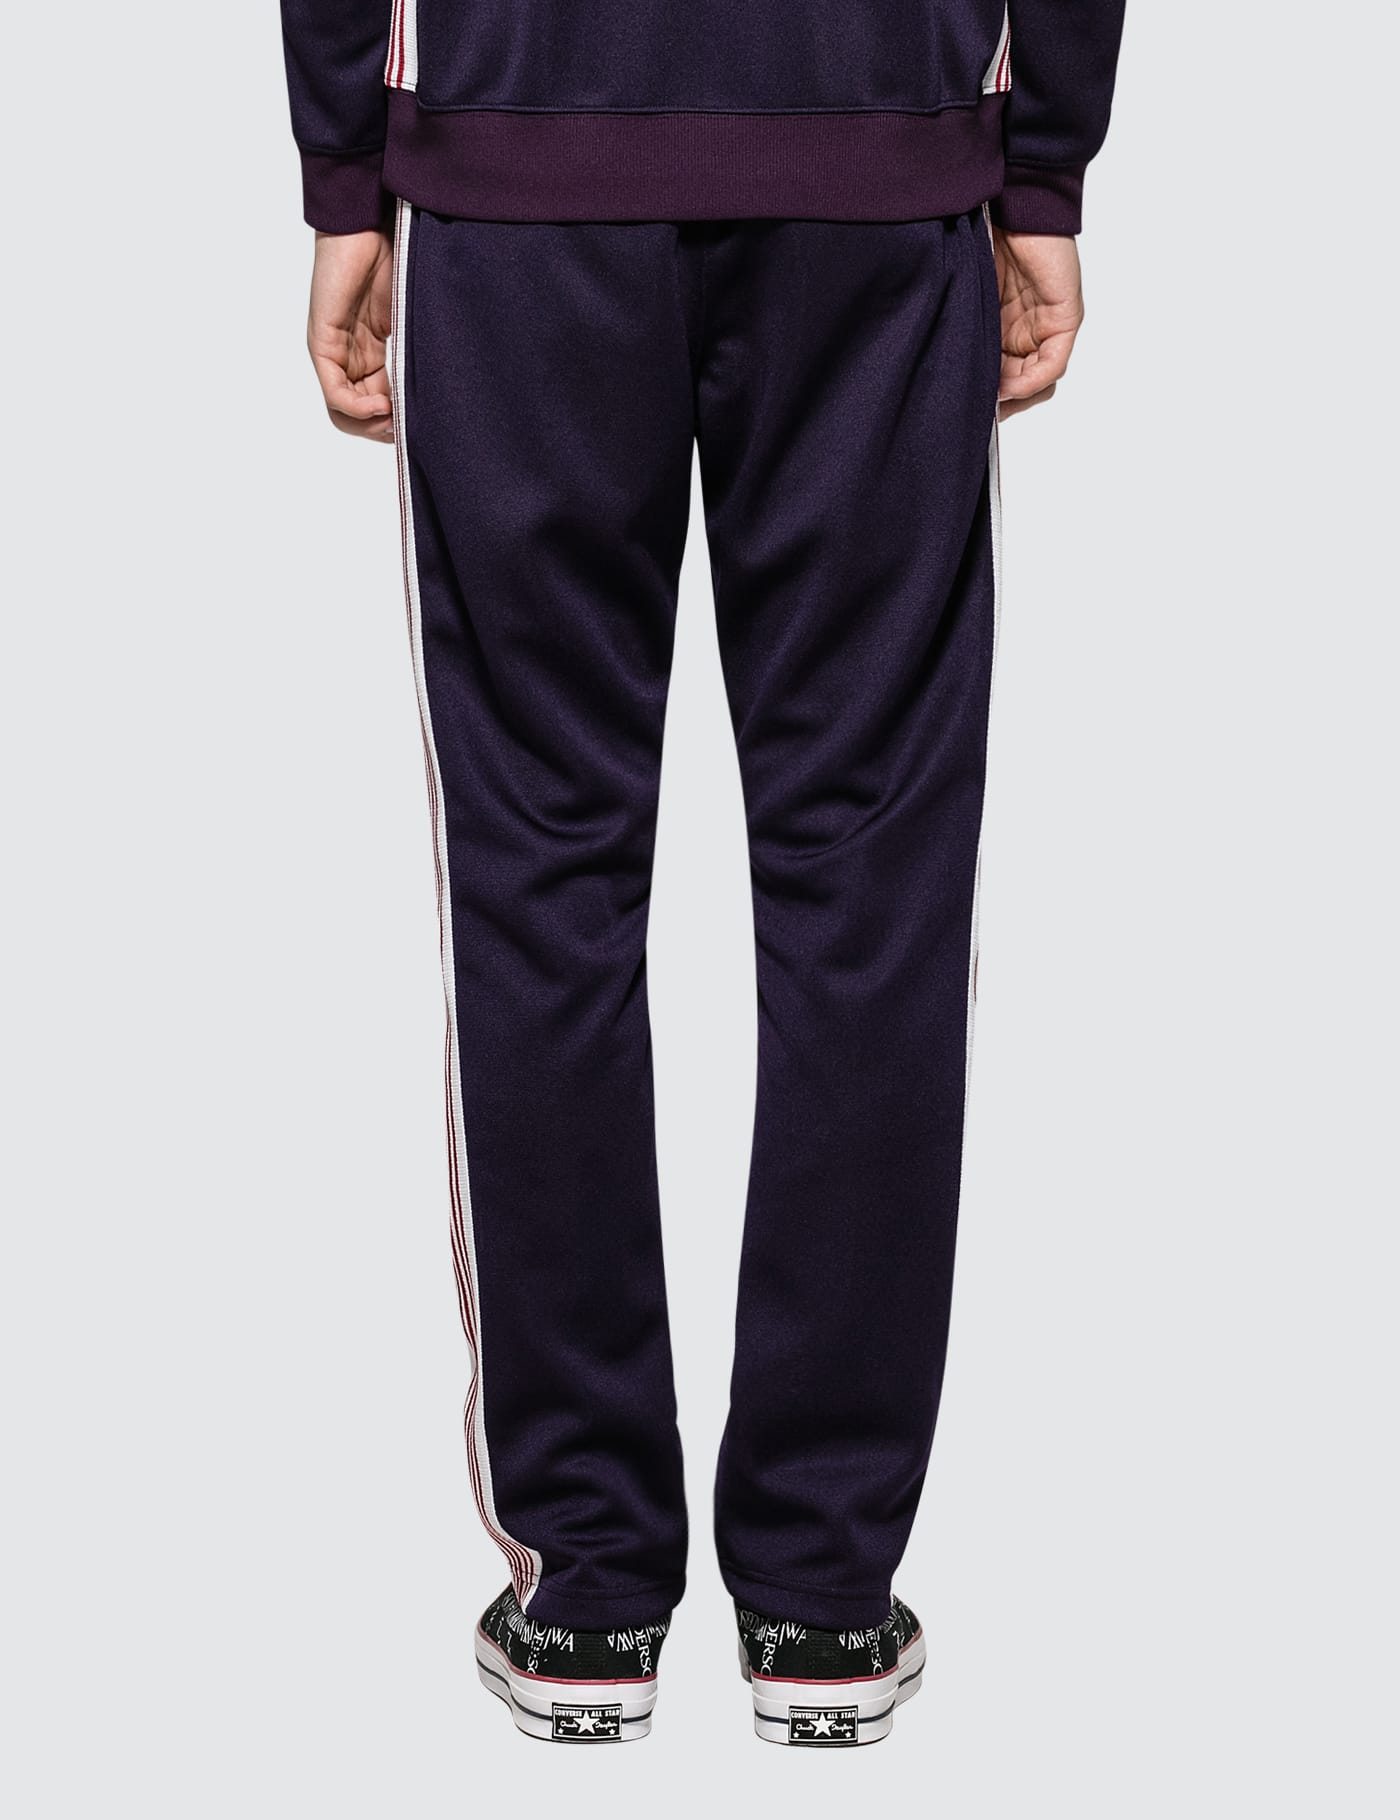 Needles - Narrow Track Pants | HBX - Globally Curated Fashion and Lifestyle  by Hypebeast